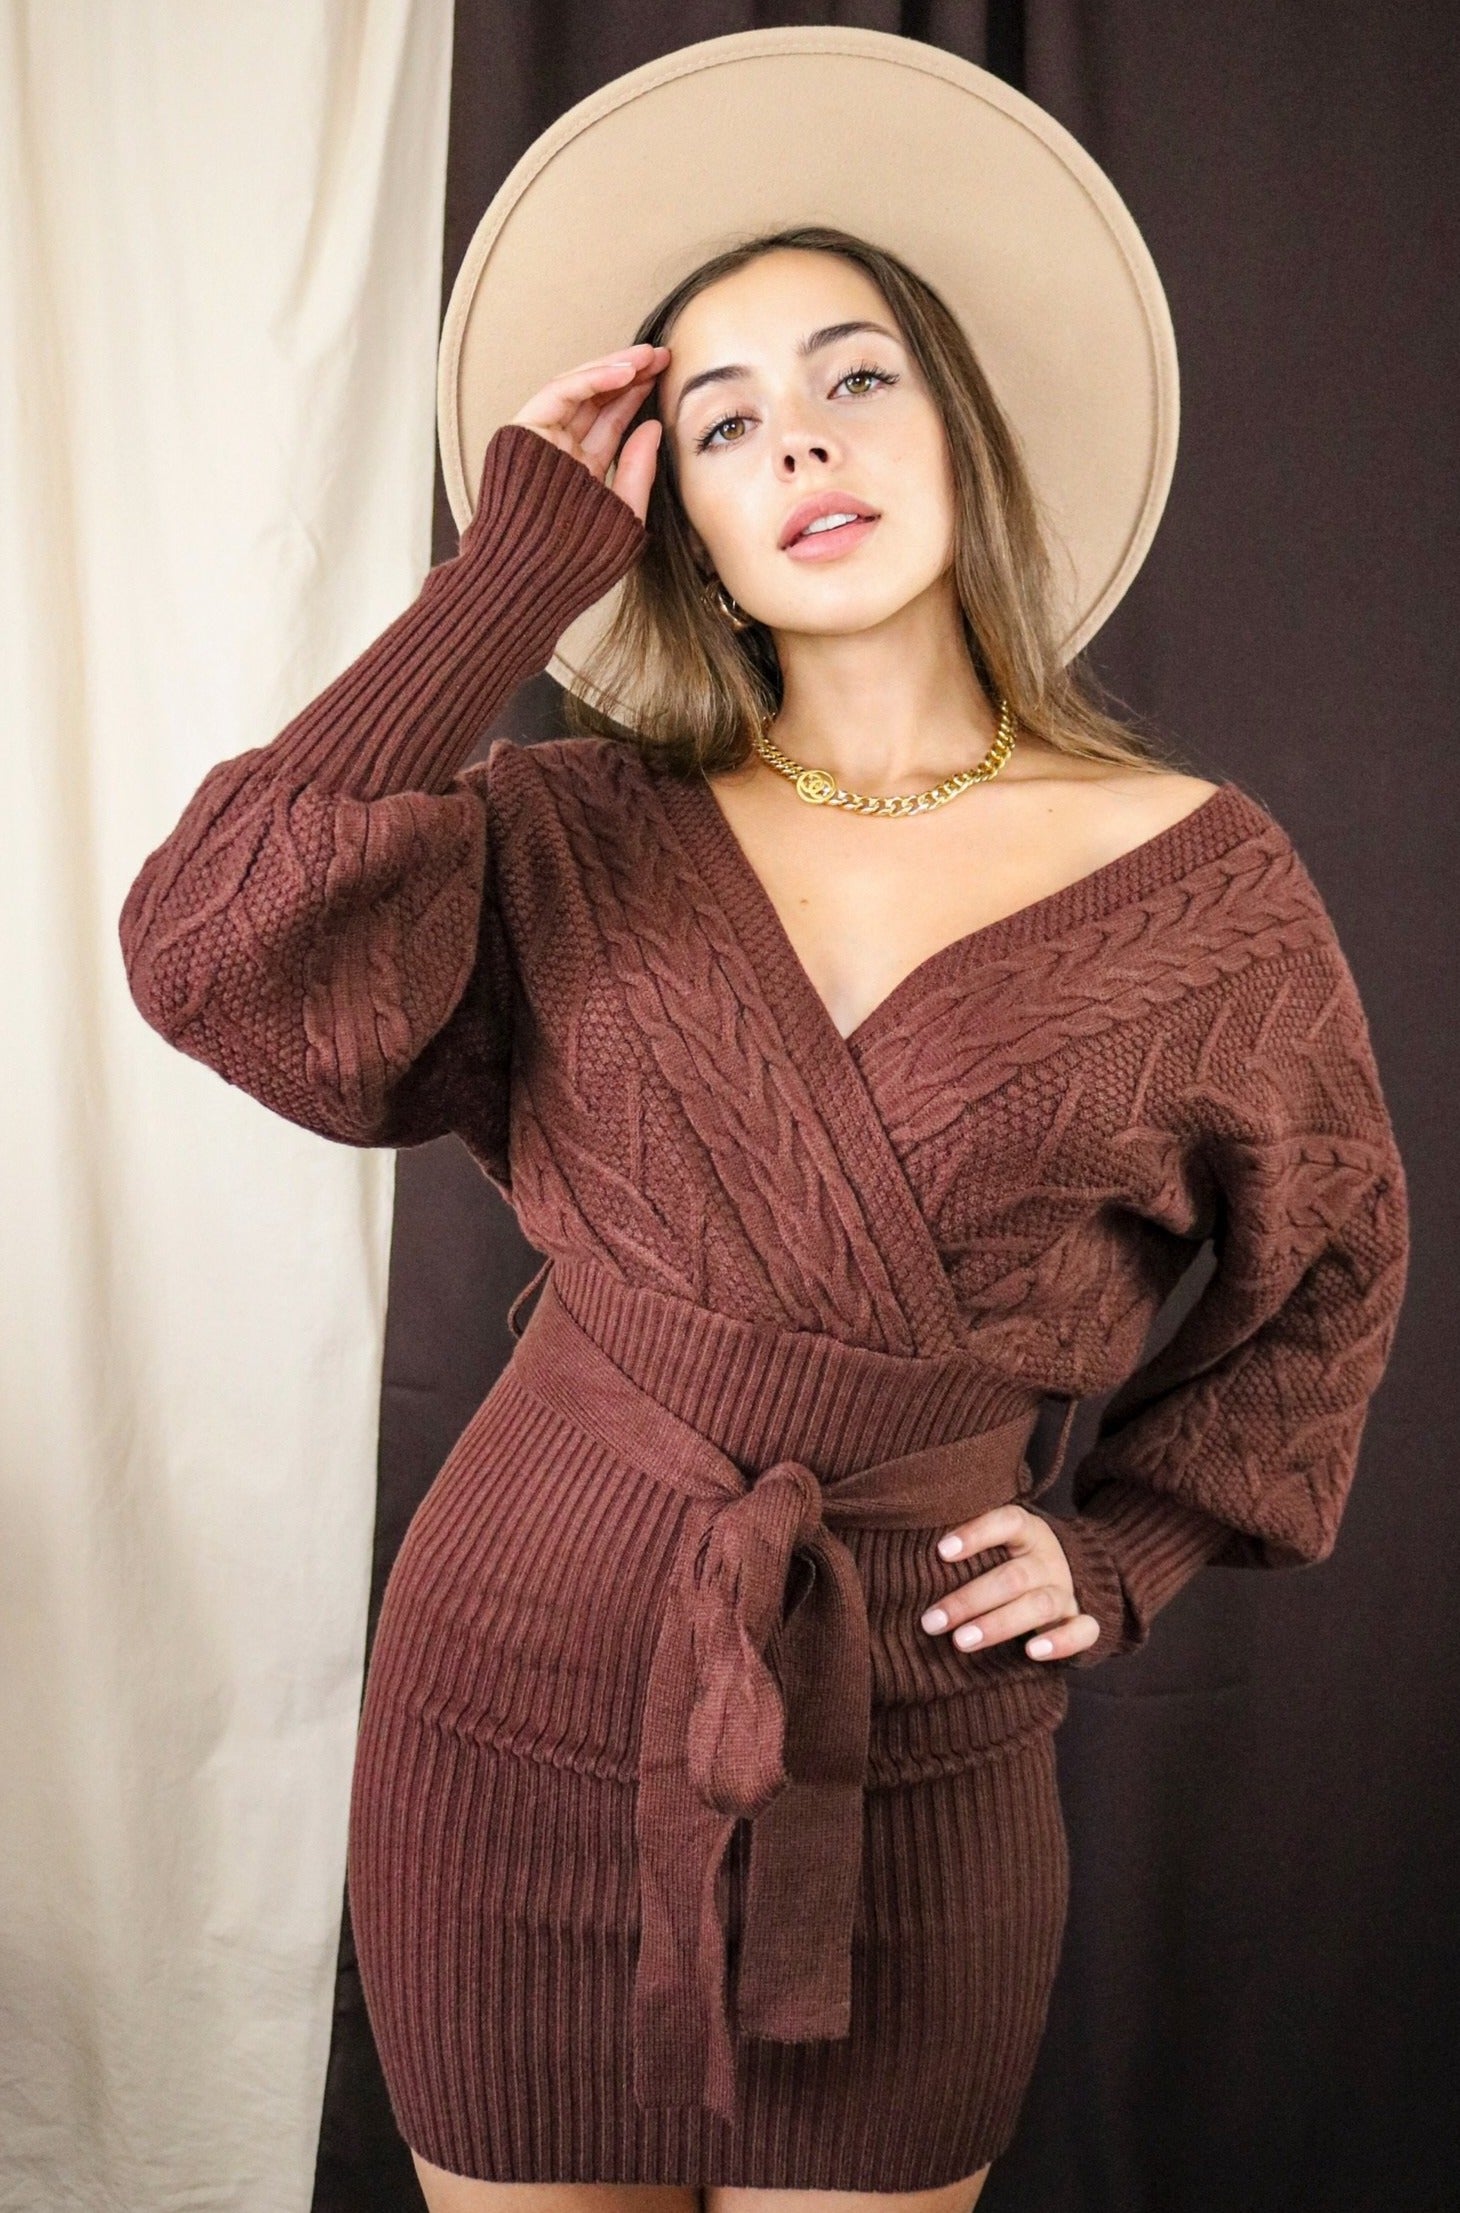 Cable Knit Off The Shoulder Sweater Dress in Cocoa. Ribbed with waist tie. Scarlette The Label, an online fashion boutique and label for women.